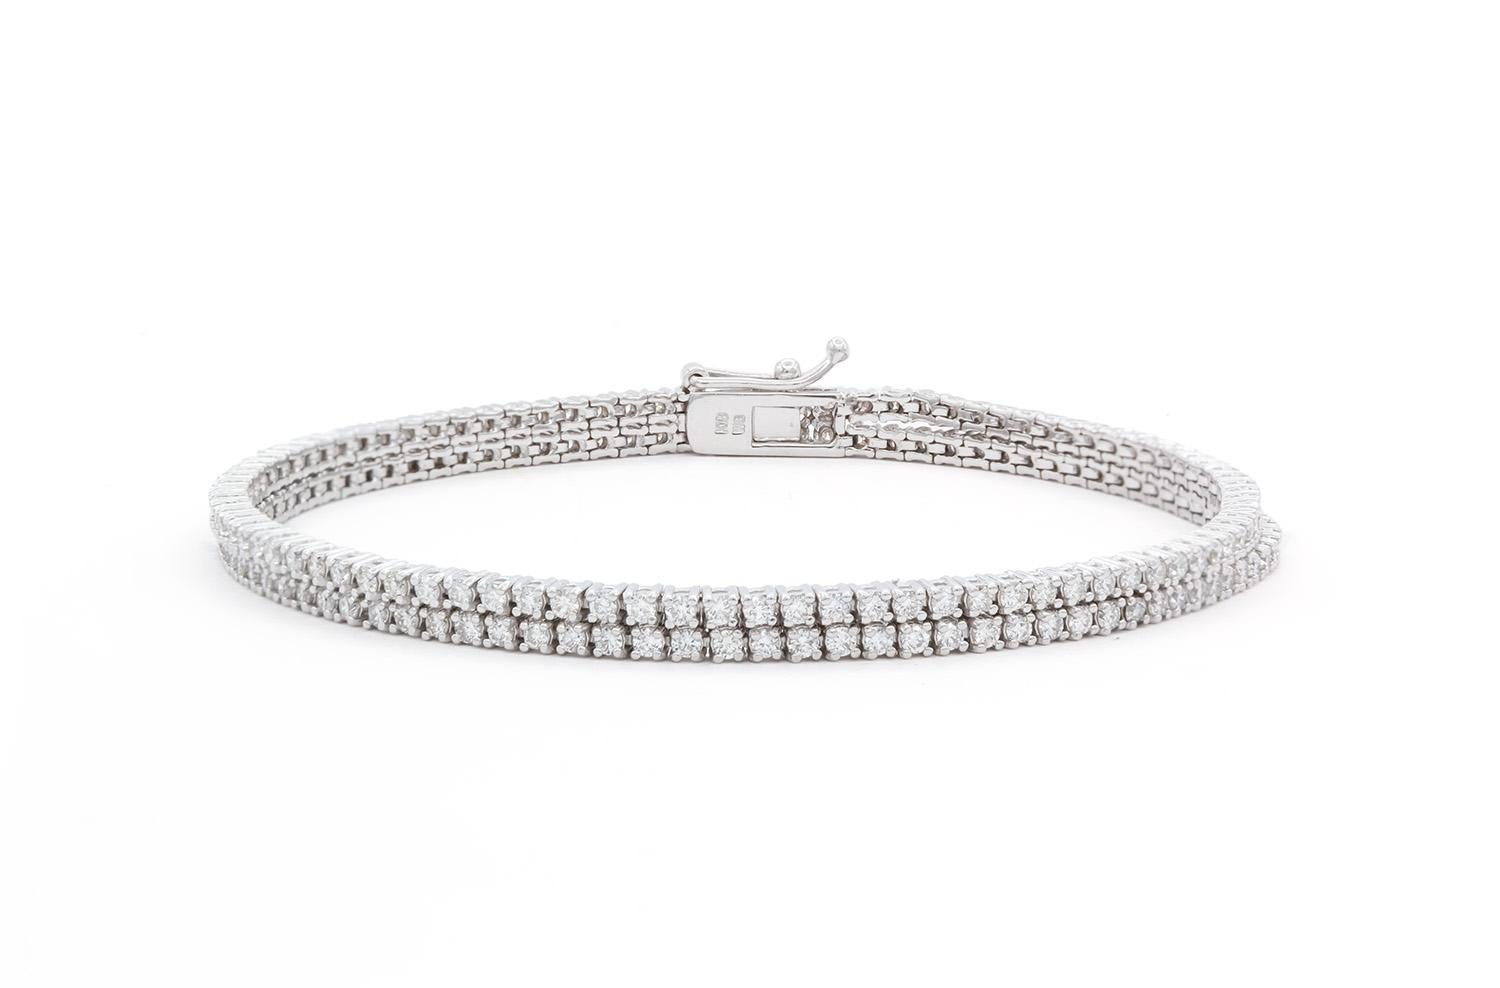 We are present this beautiful 18k White Gold & Diamond Double Strand Tennis Bracelet. It features two strands of diamonds with an estimated 2.50ctw G-H/VS-SI round brilliant cut diamonds set in this 18k white gold. The bracelet measures 7″ long and